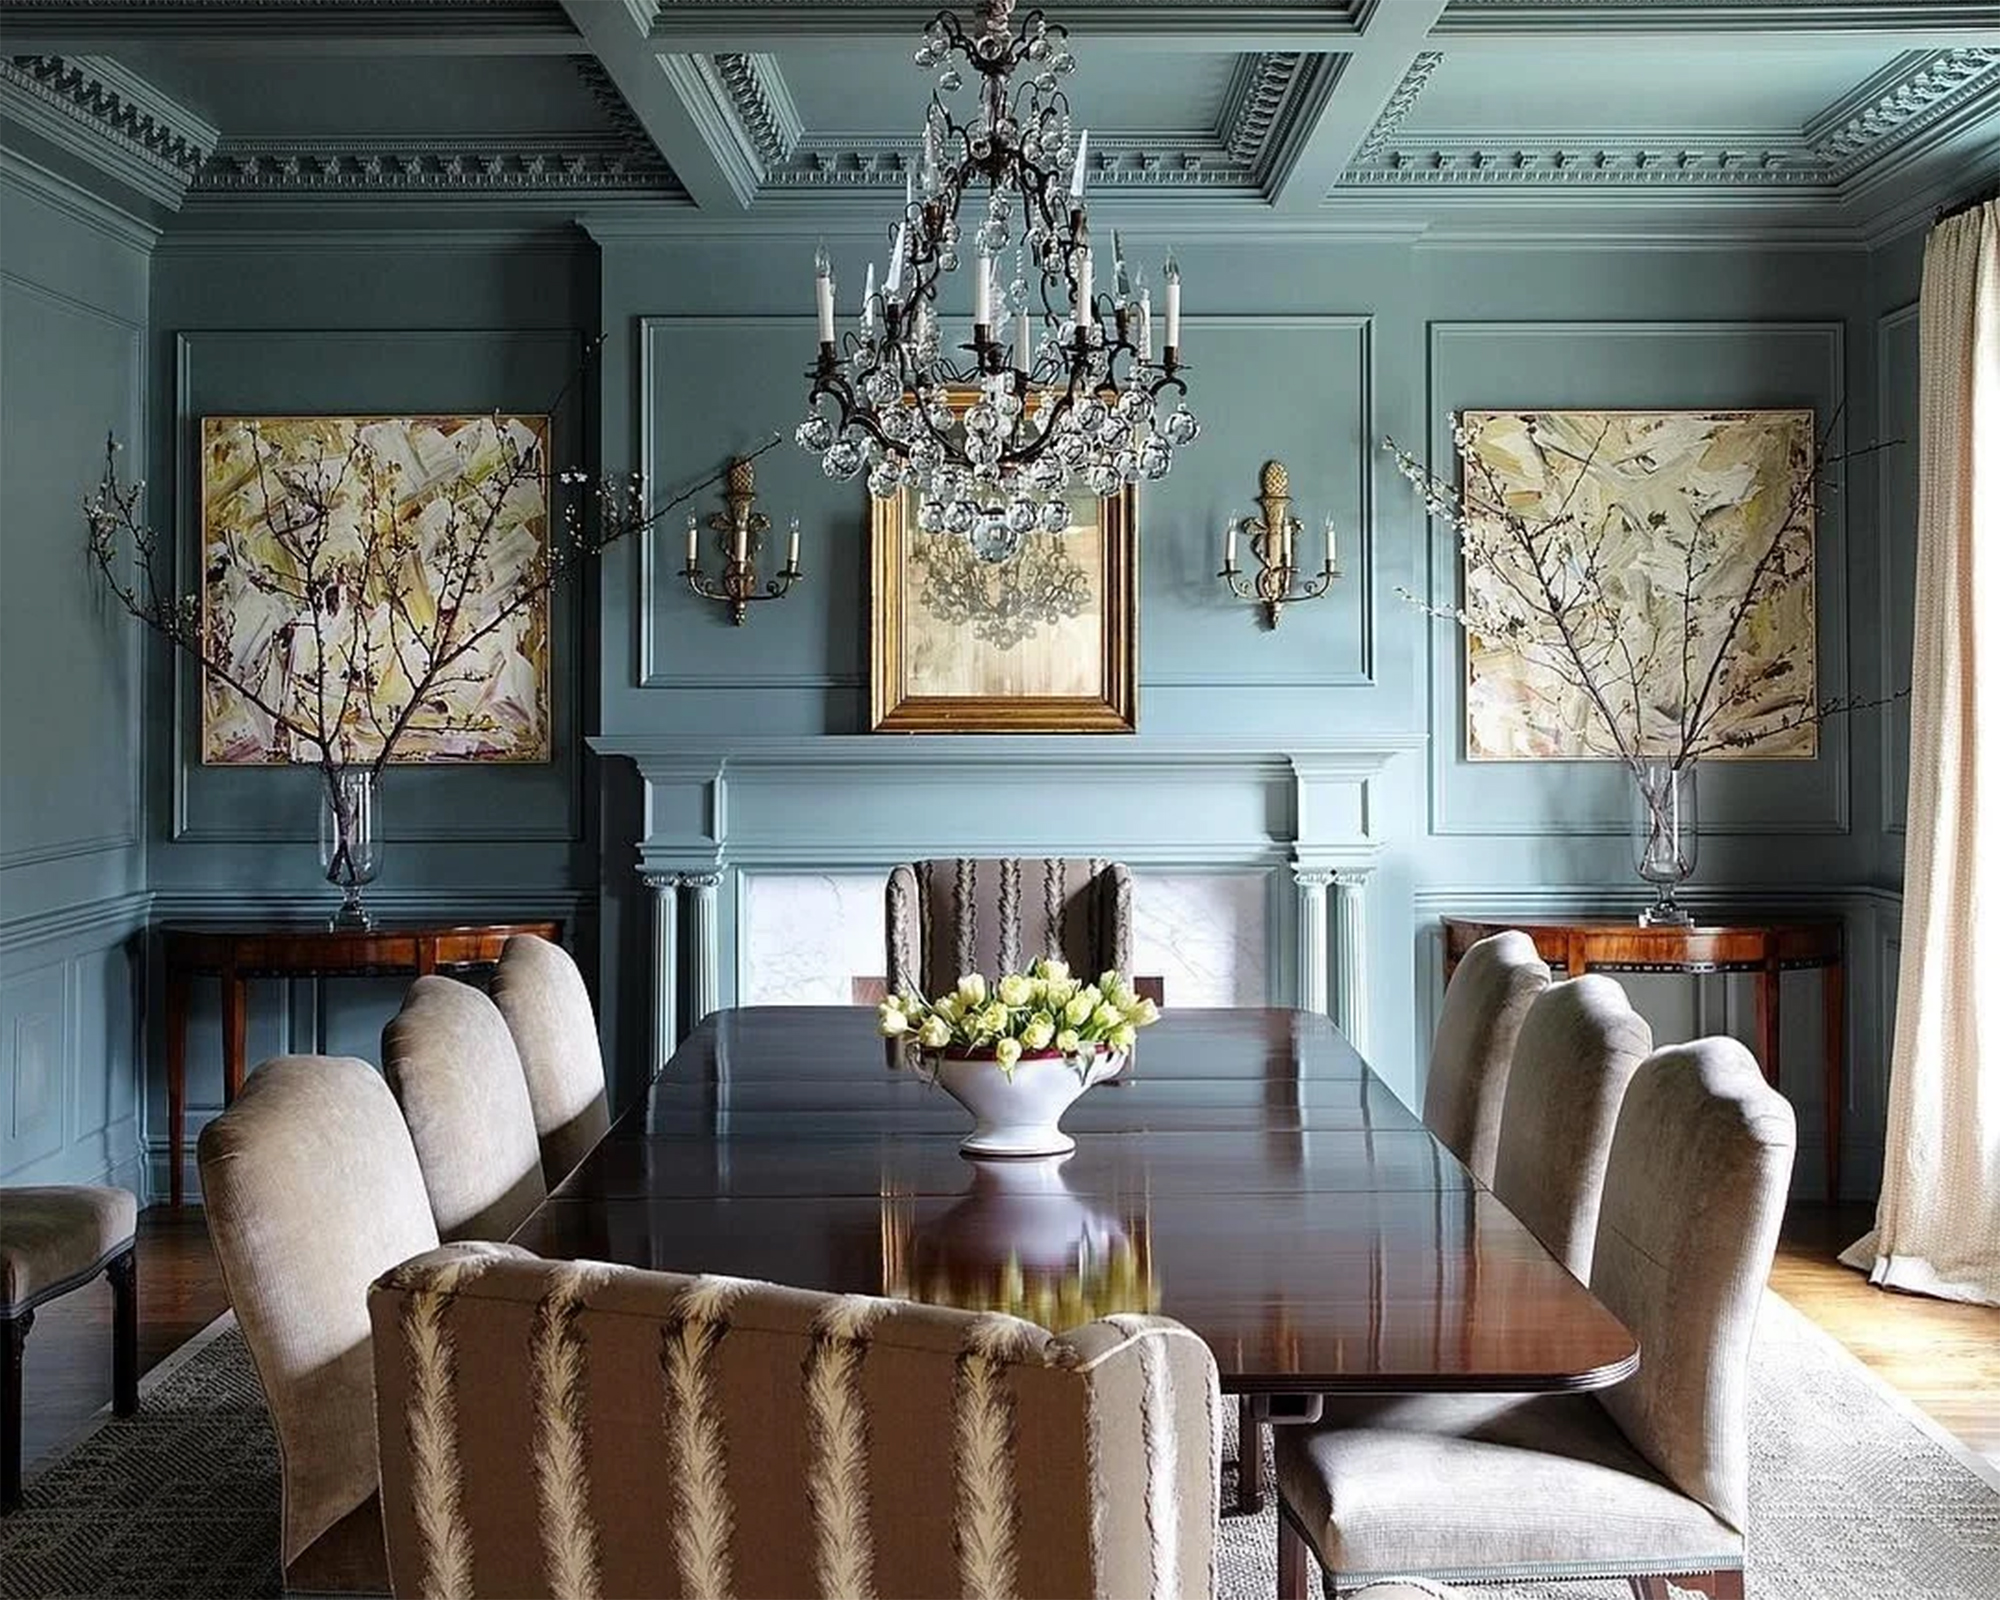 Farrow & Ball dining area with green blue wall paint decor and chandelier lighting design